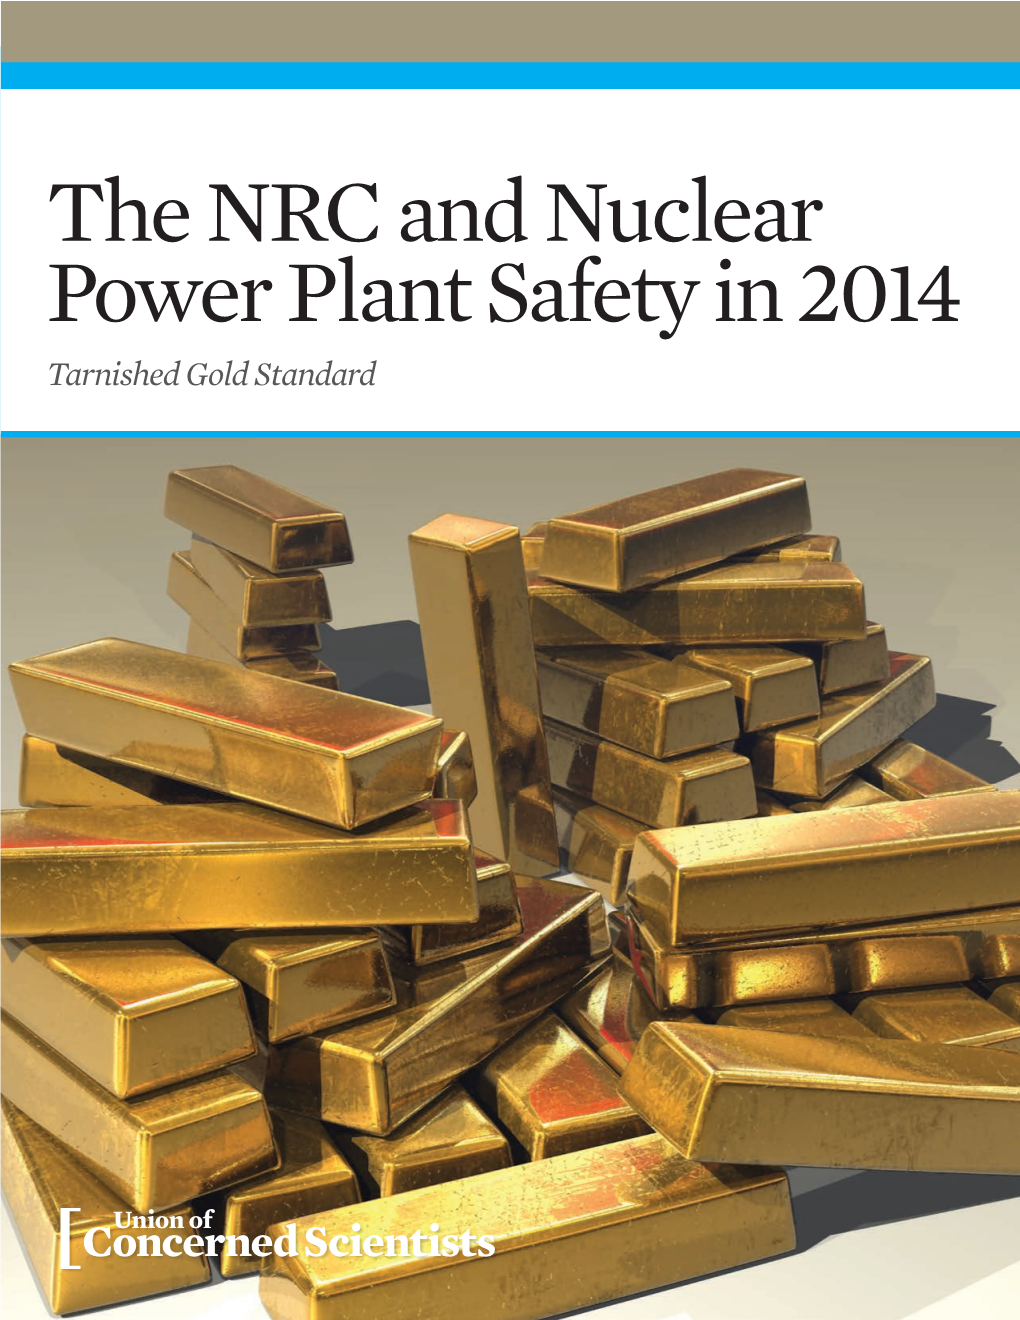 The NRC and Nuclear Power Plant Safety in 2014 Tarnished Gold Standard